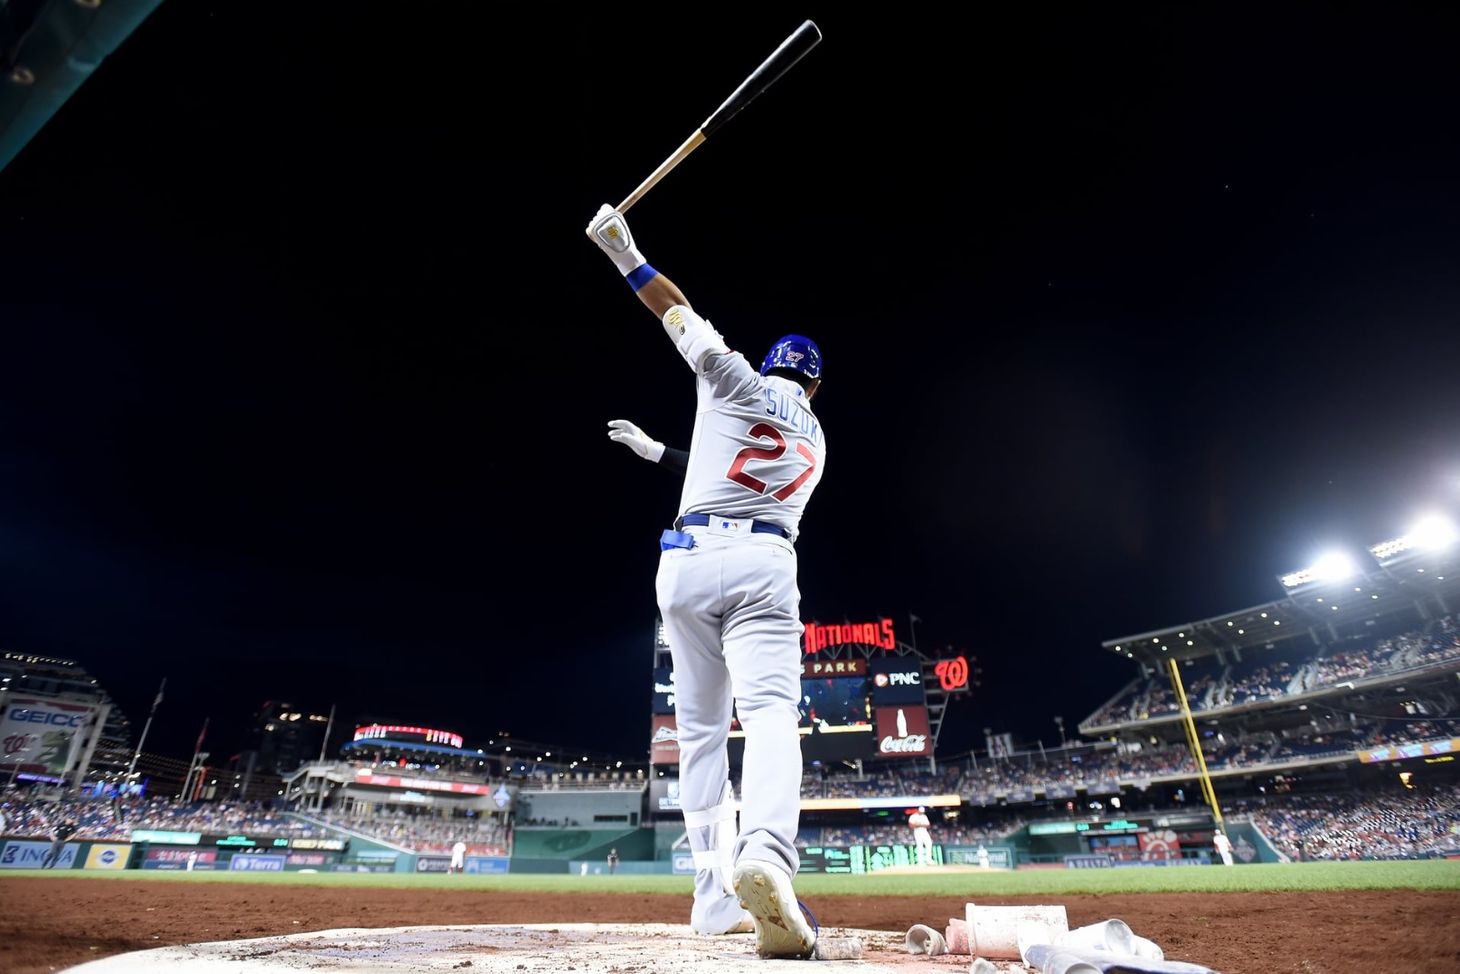 Cruz's eighth-inning homer lifts Nationals over Cubs 5-4